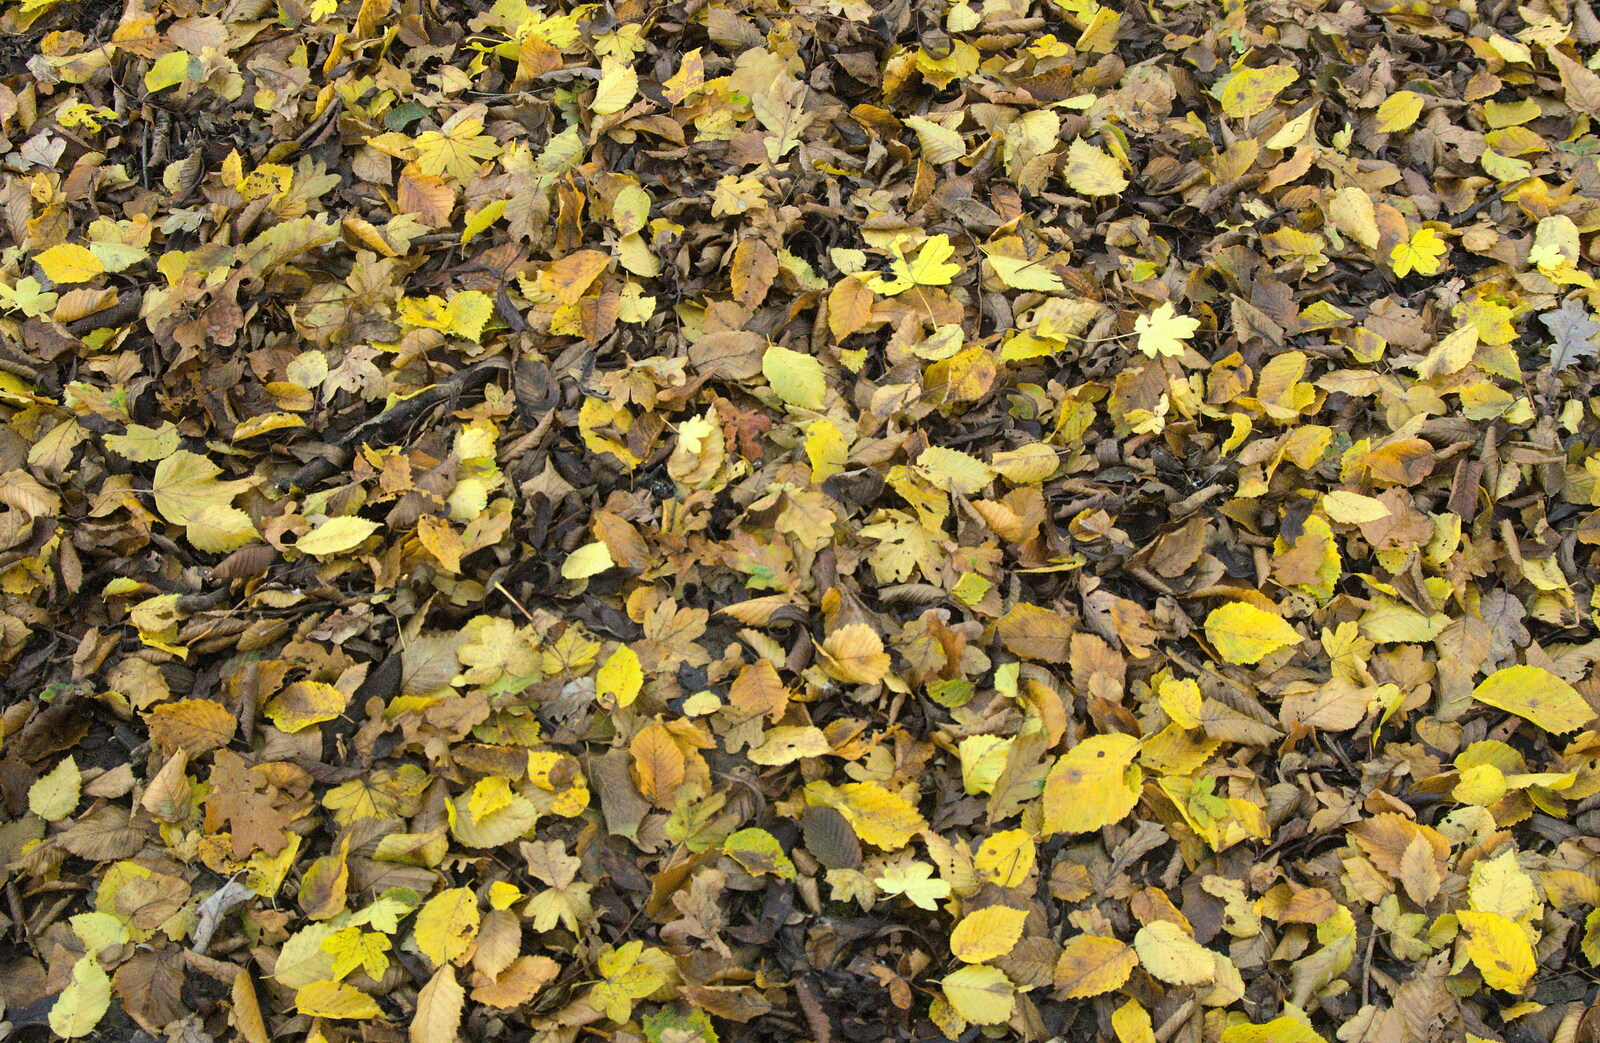 A carpet of leaves from A Busy Day, Southwold and Thornham, Suffolk - 11th November 2012